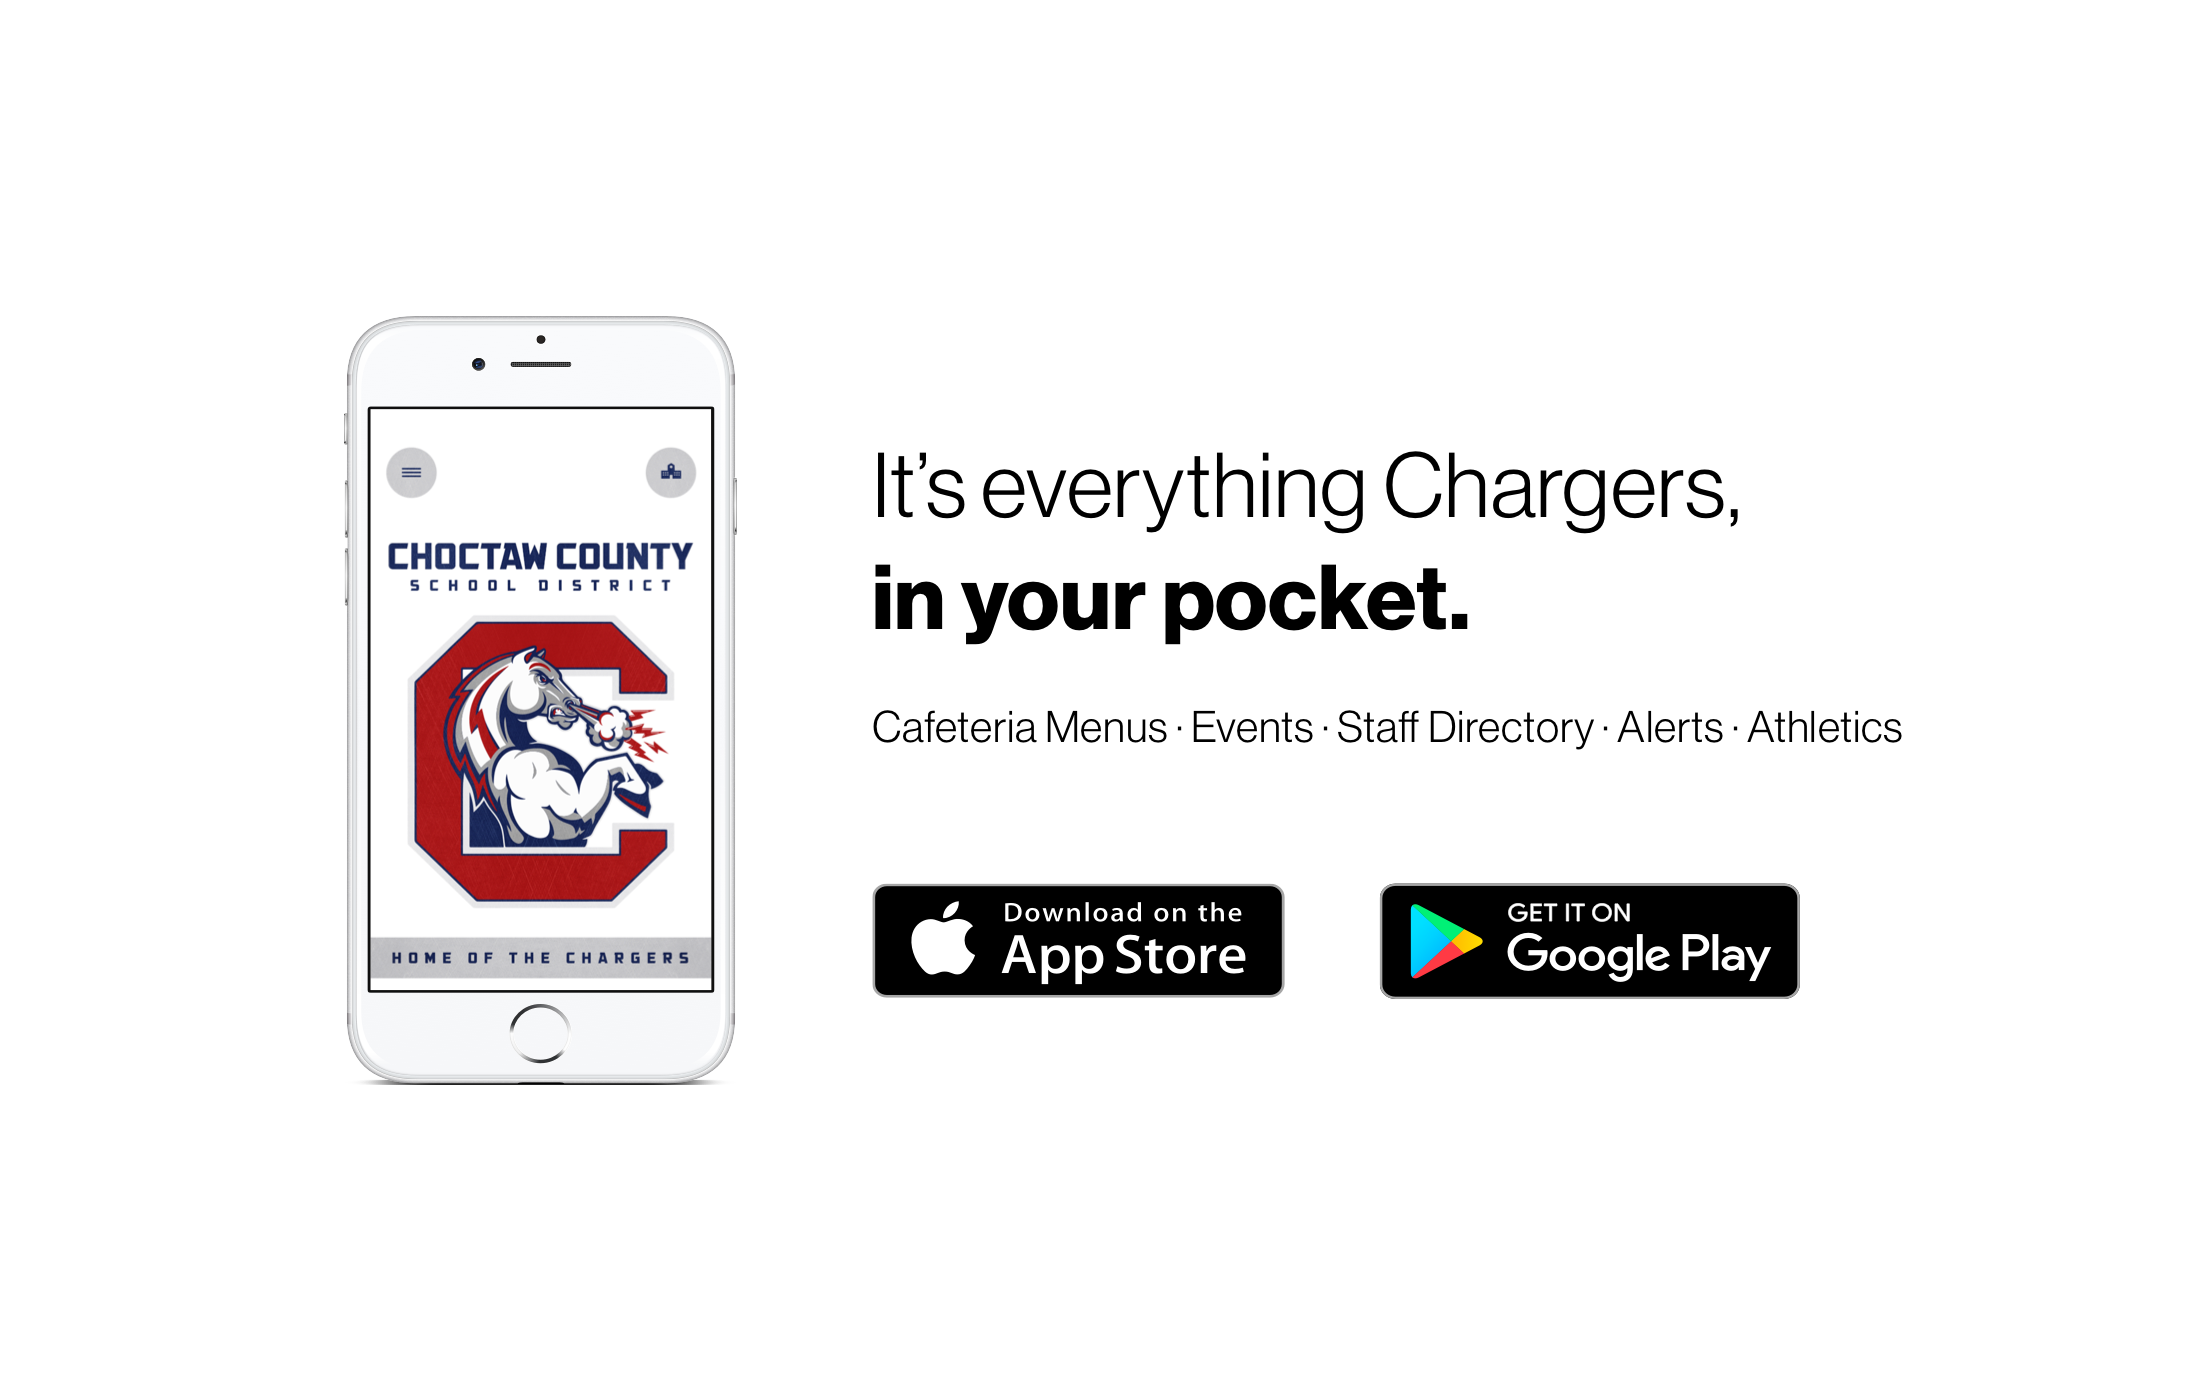 It's everything chargers in your pocket. Available on Apple and Google App Stores